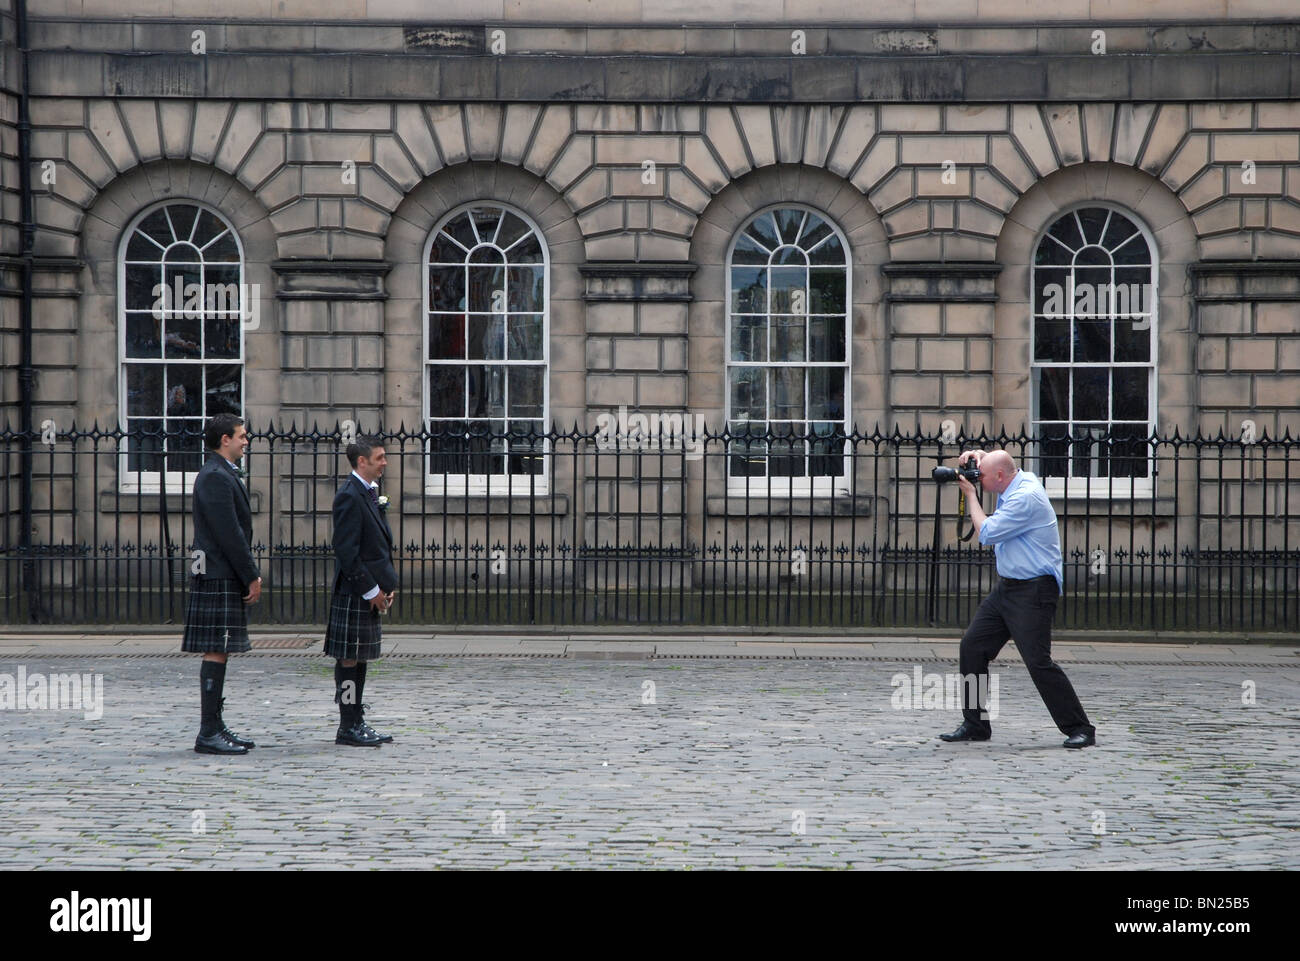 Wedding photographer photographing wedding guests in kilts on the High Street in Edinburgh Stock Photo